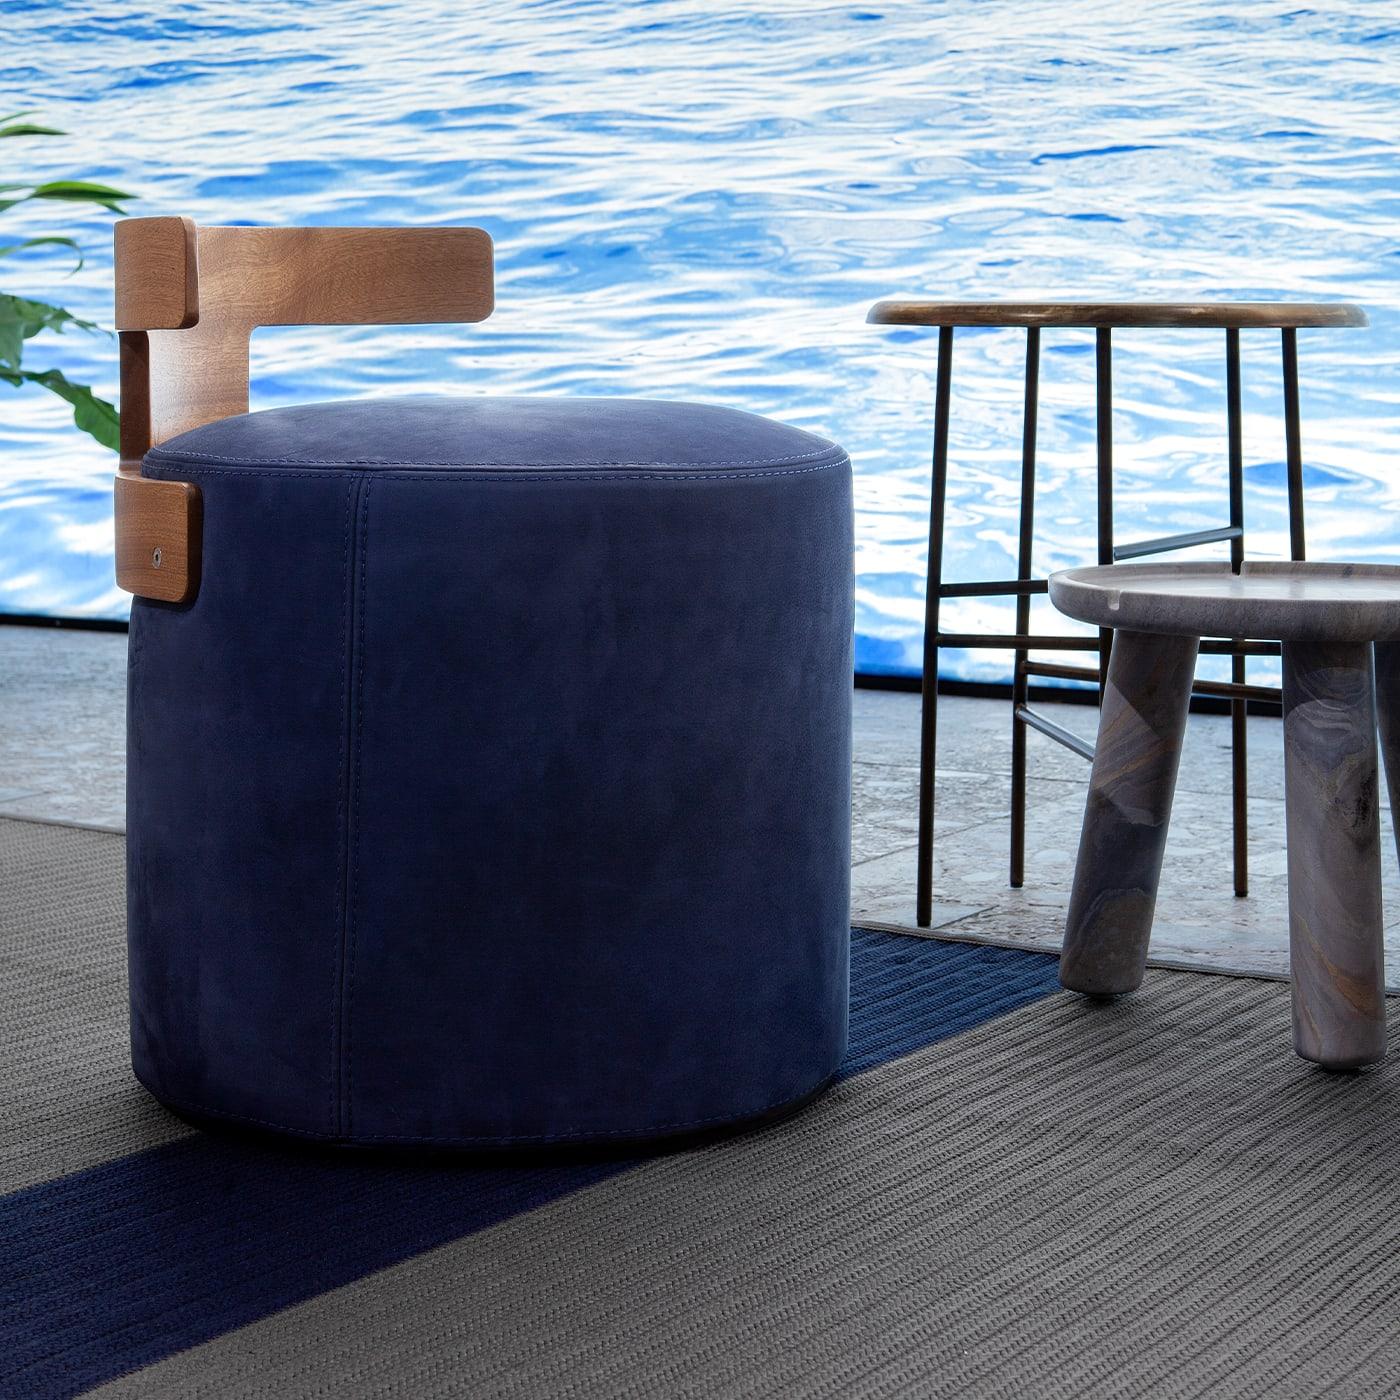 Clean and sophisticated lines define the singular yet customizable silhouette of this extremely comfortable pouf. Upholstered with blue Nabuk leather and softly padded, the cylindrical seat is enriched with a T-shaped backrest in mahogany.